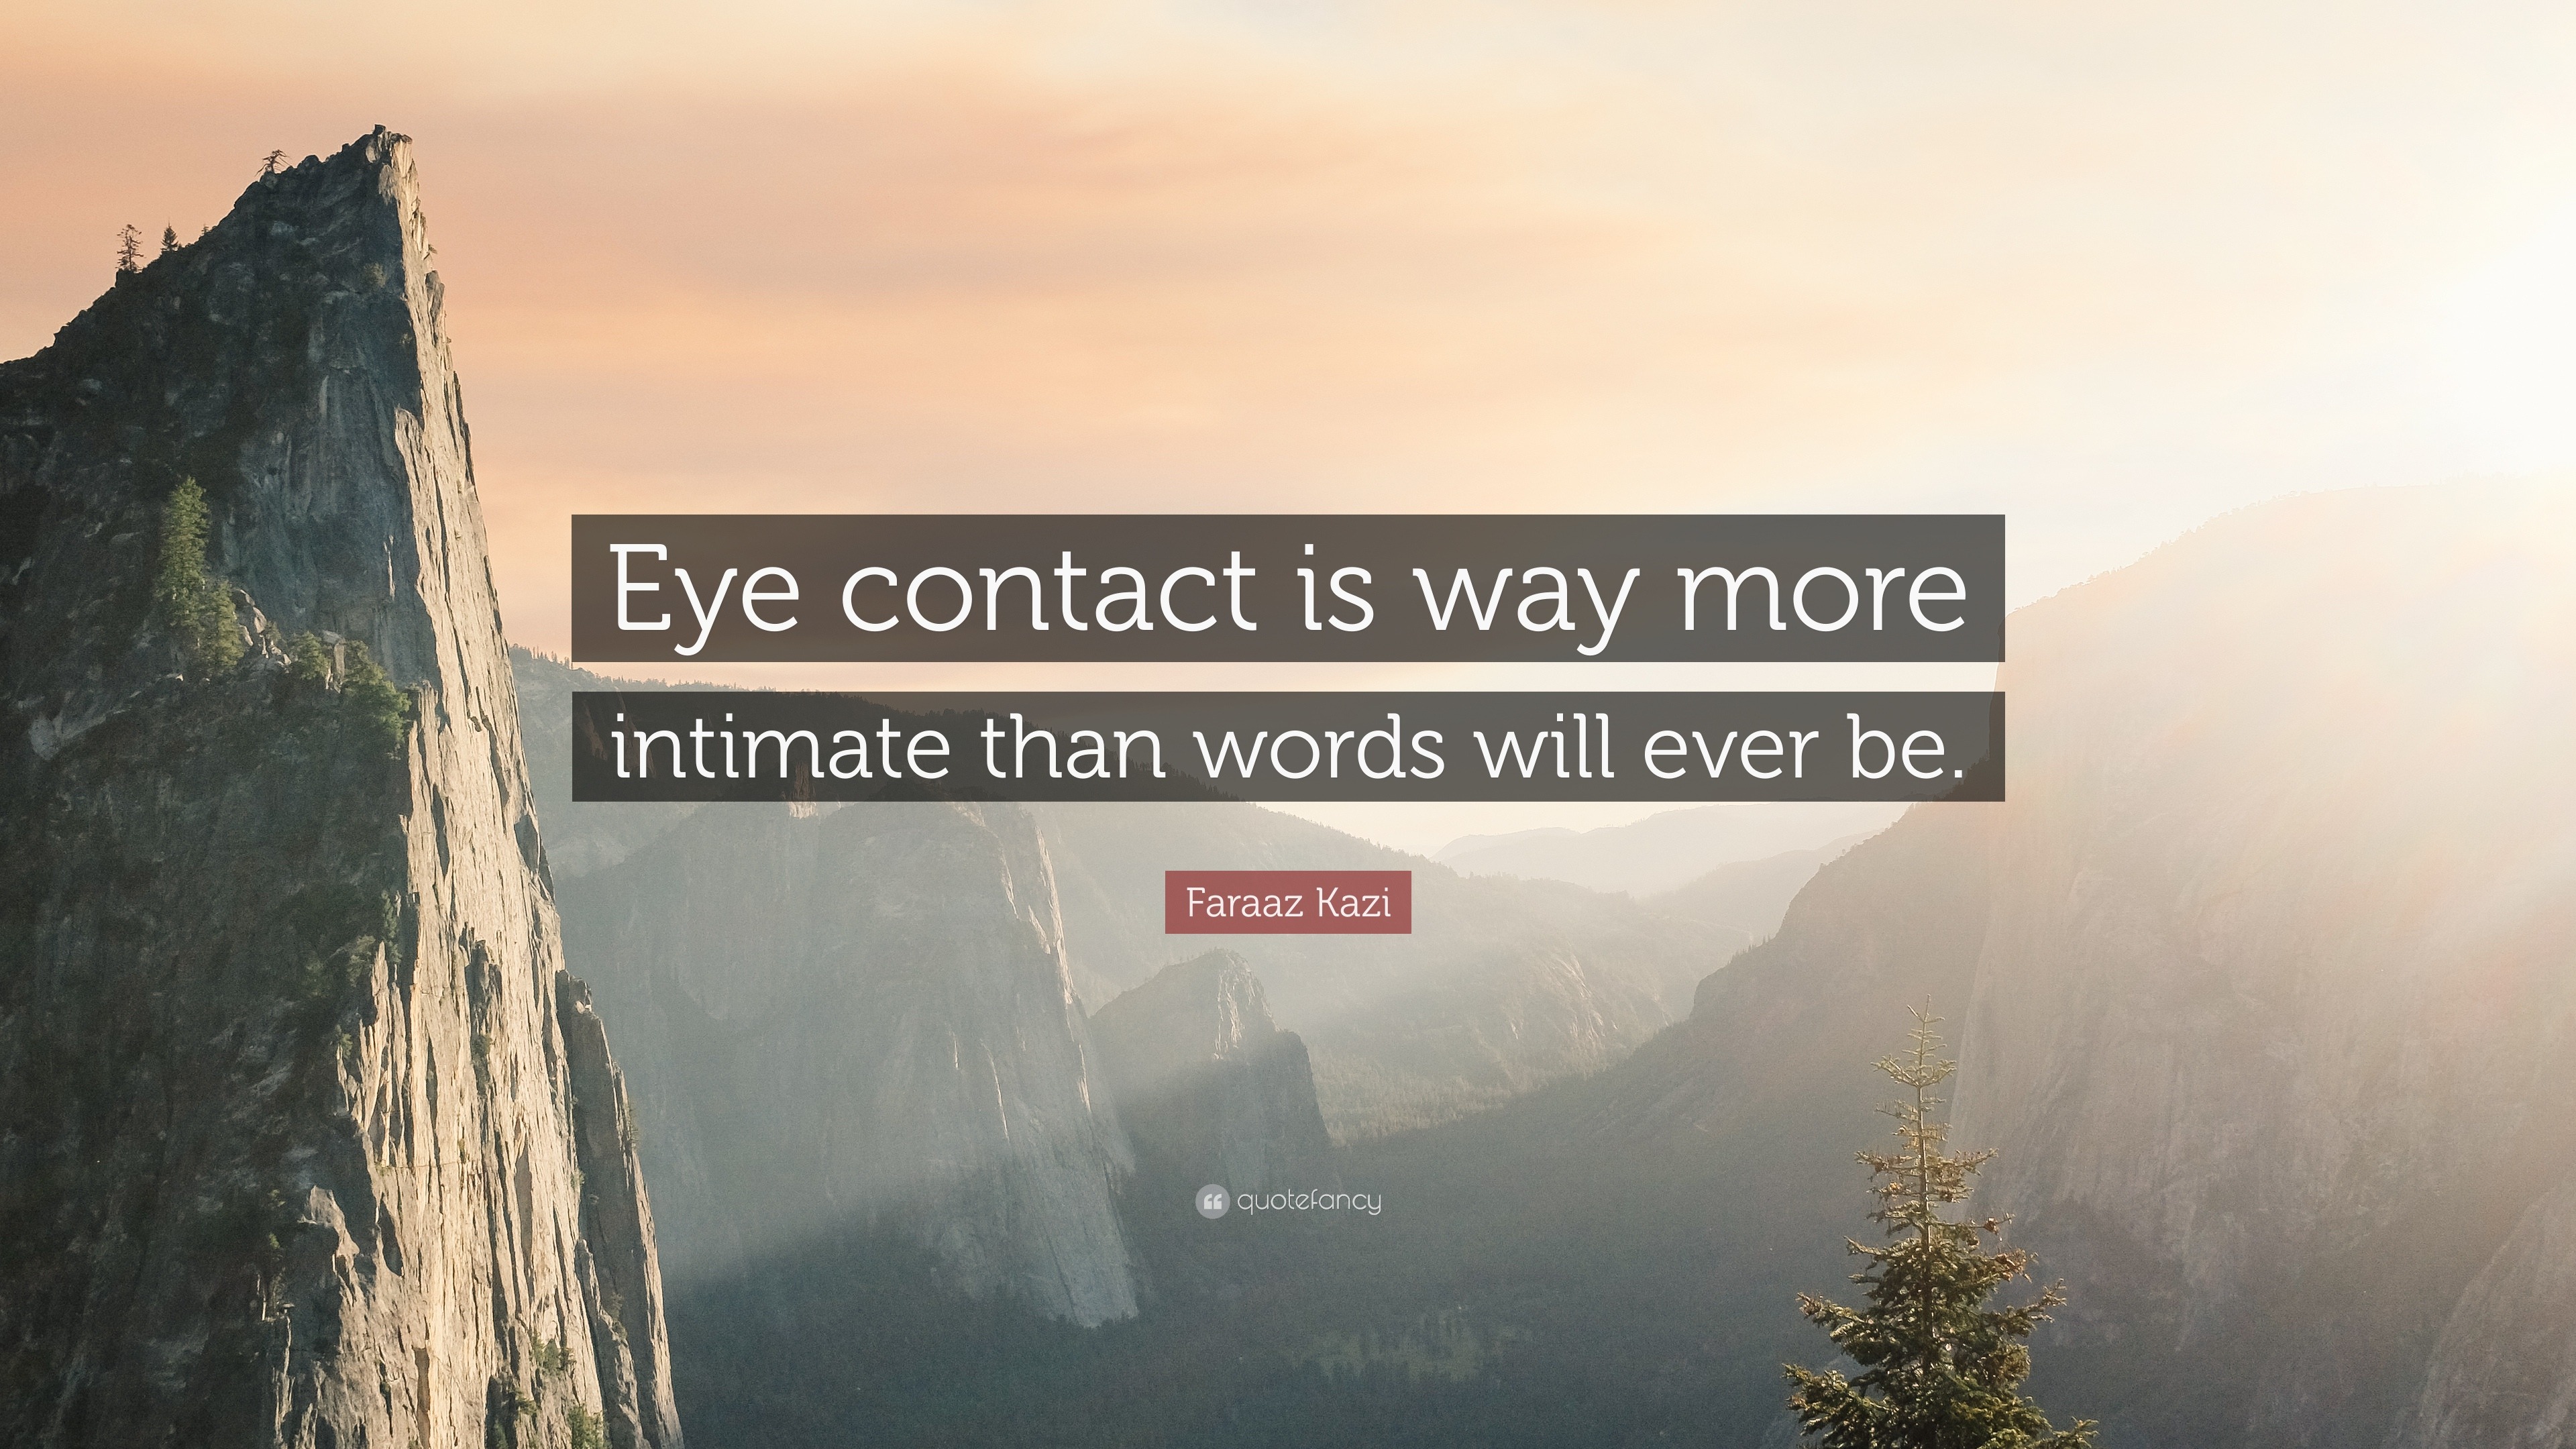 Faraaz Kazi Quote “eye Contact Is Way More Intimate Than Words Will Ever Be” 